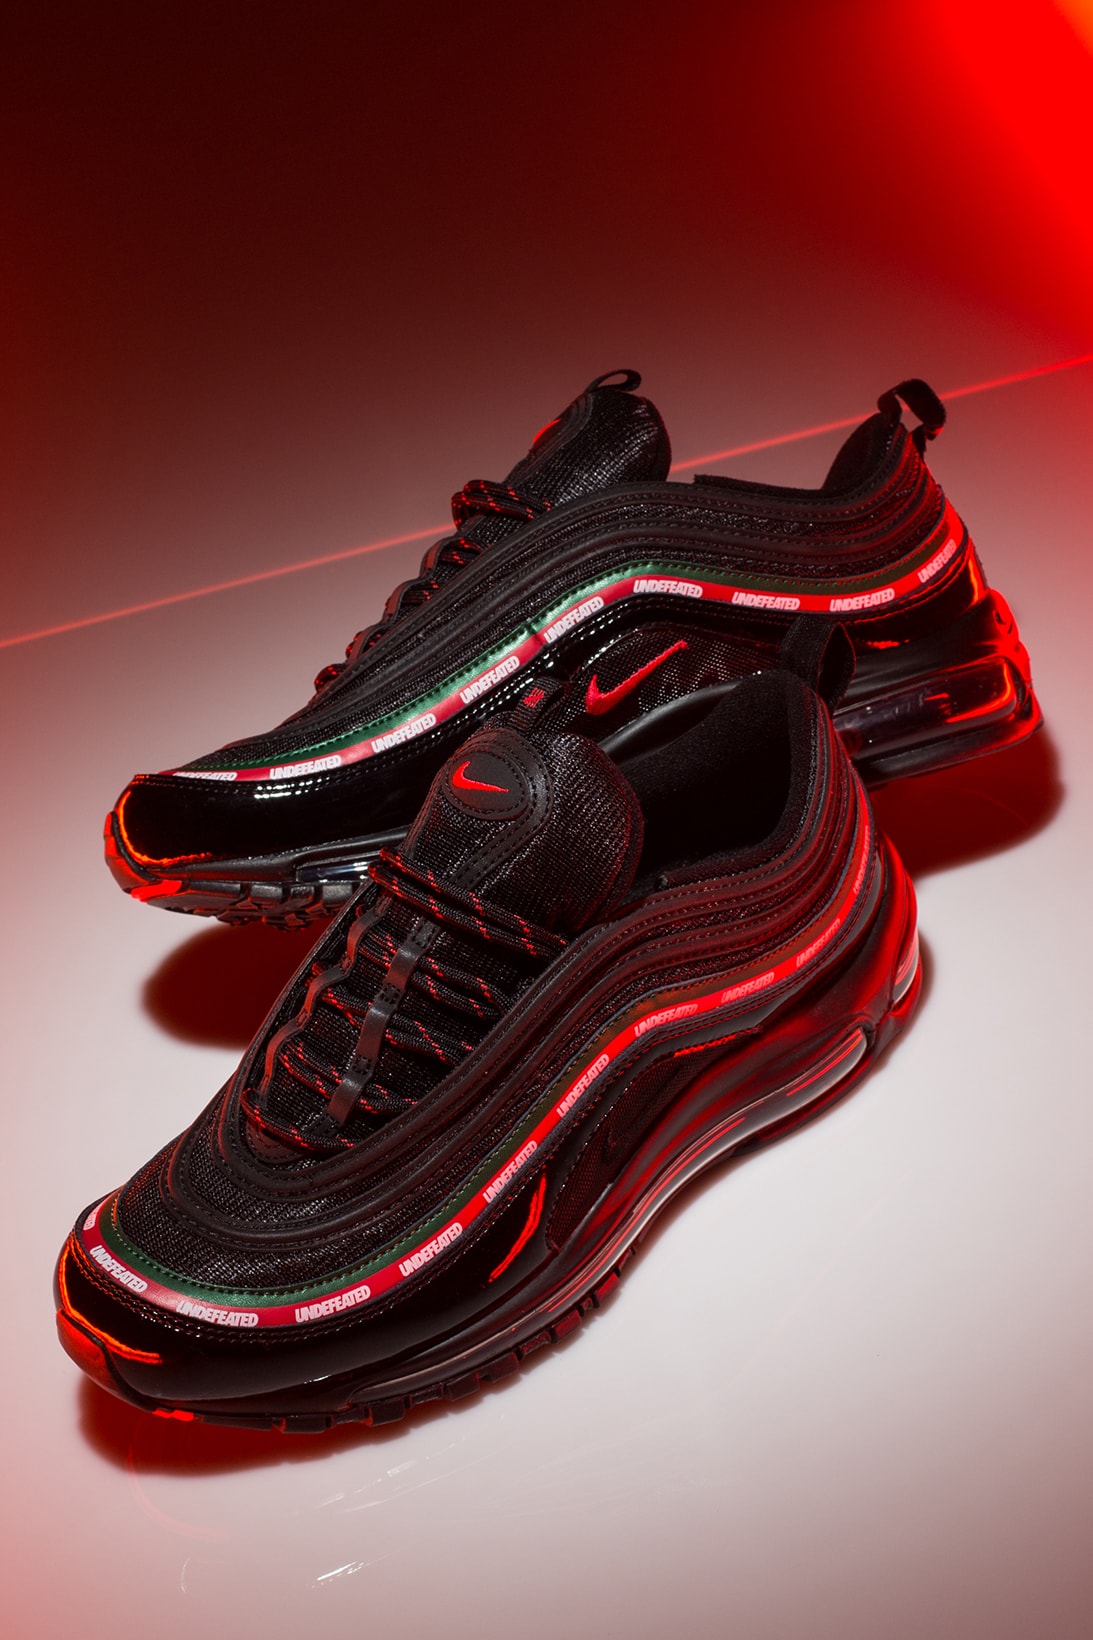 UNDEFEATED x Nike Air Max 97 Apparel | Hypebeast